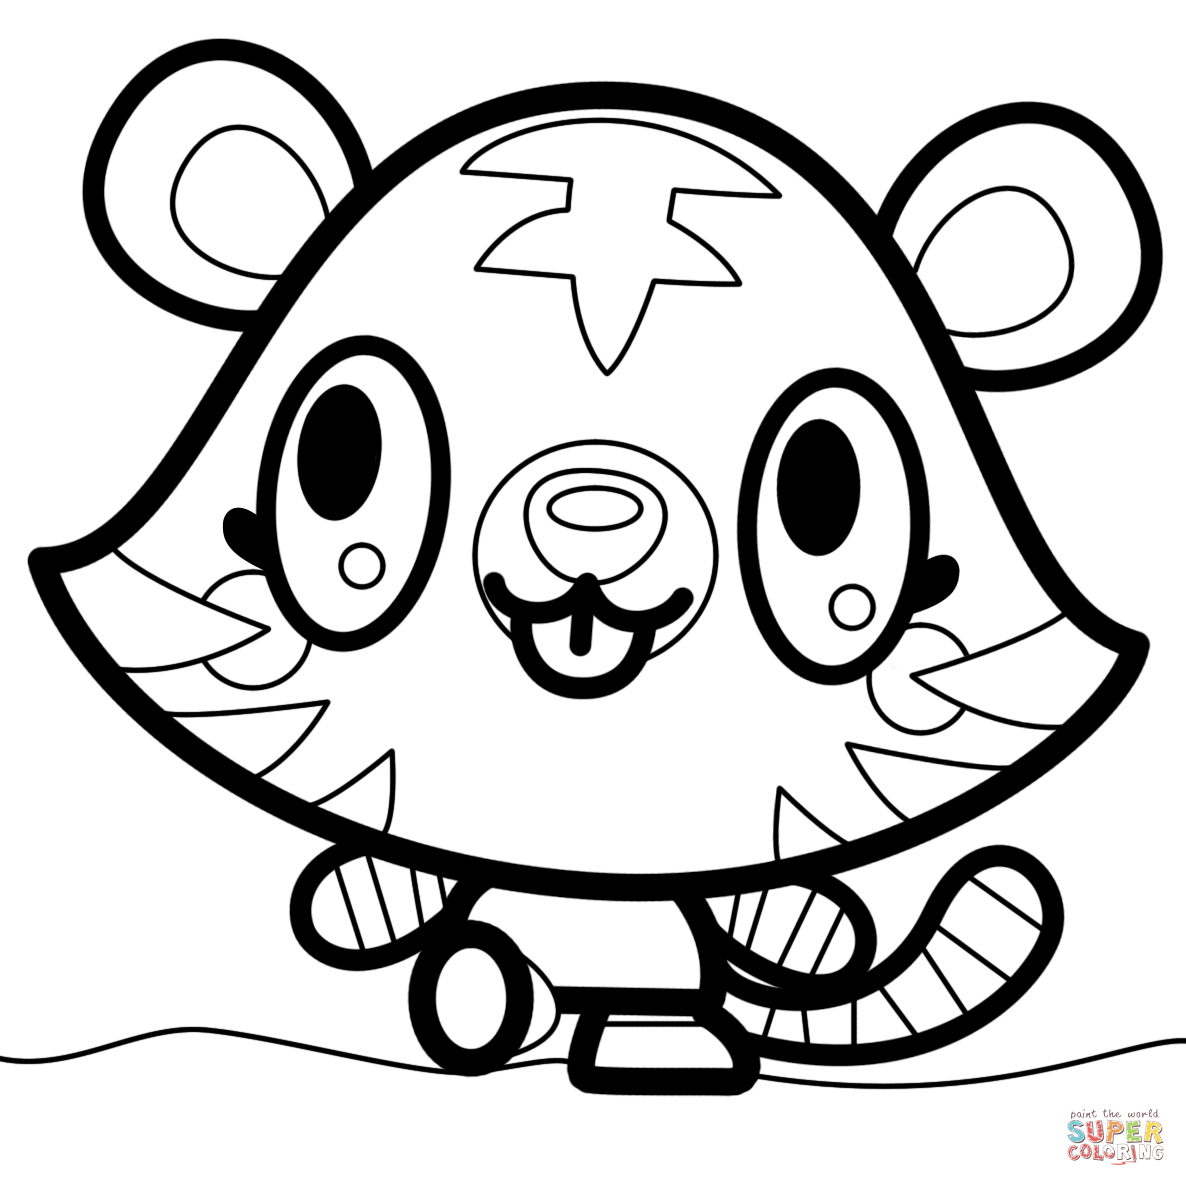 Moshi Monster Coloring Pages Moshi Monsters And Moshlings Coloring Pages Free Coloring Pages